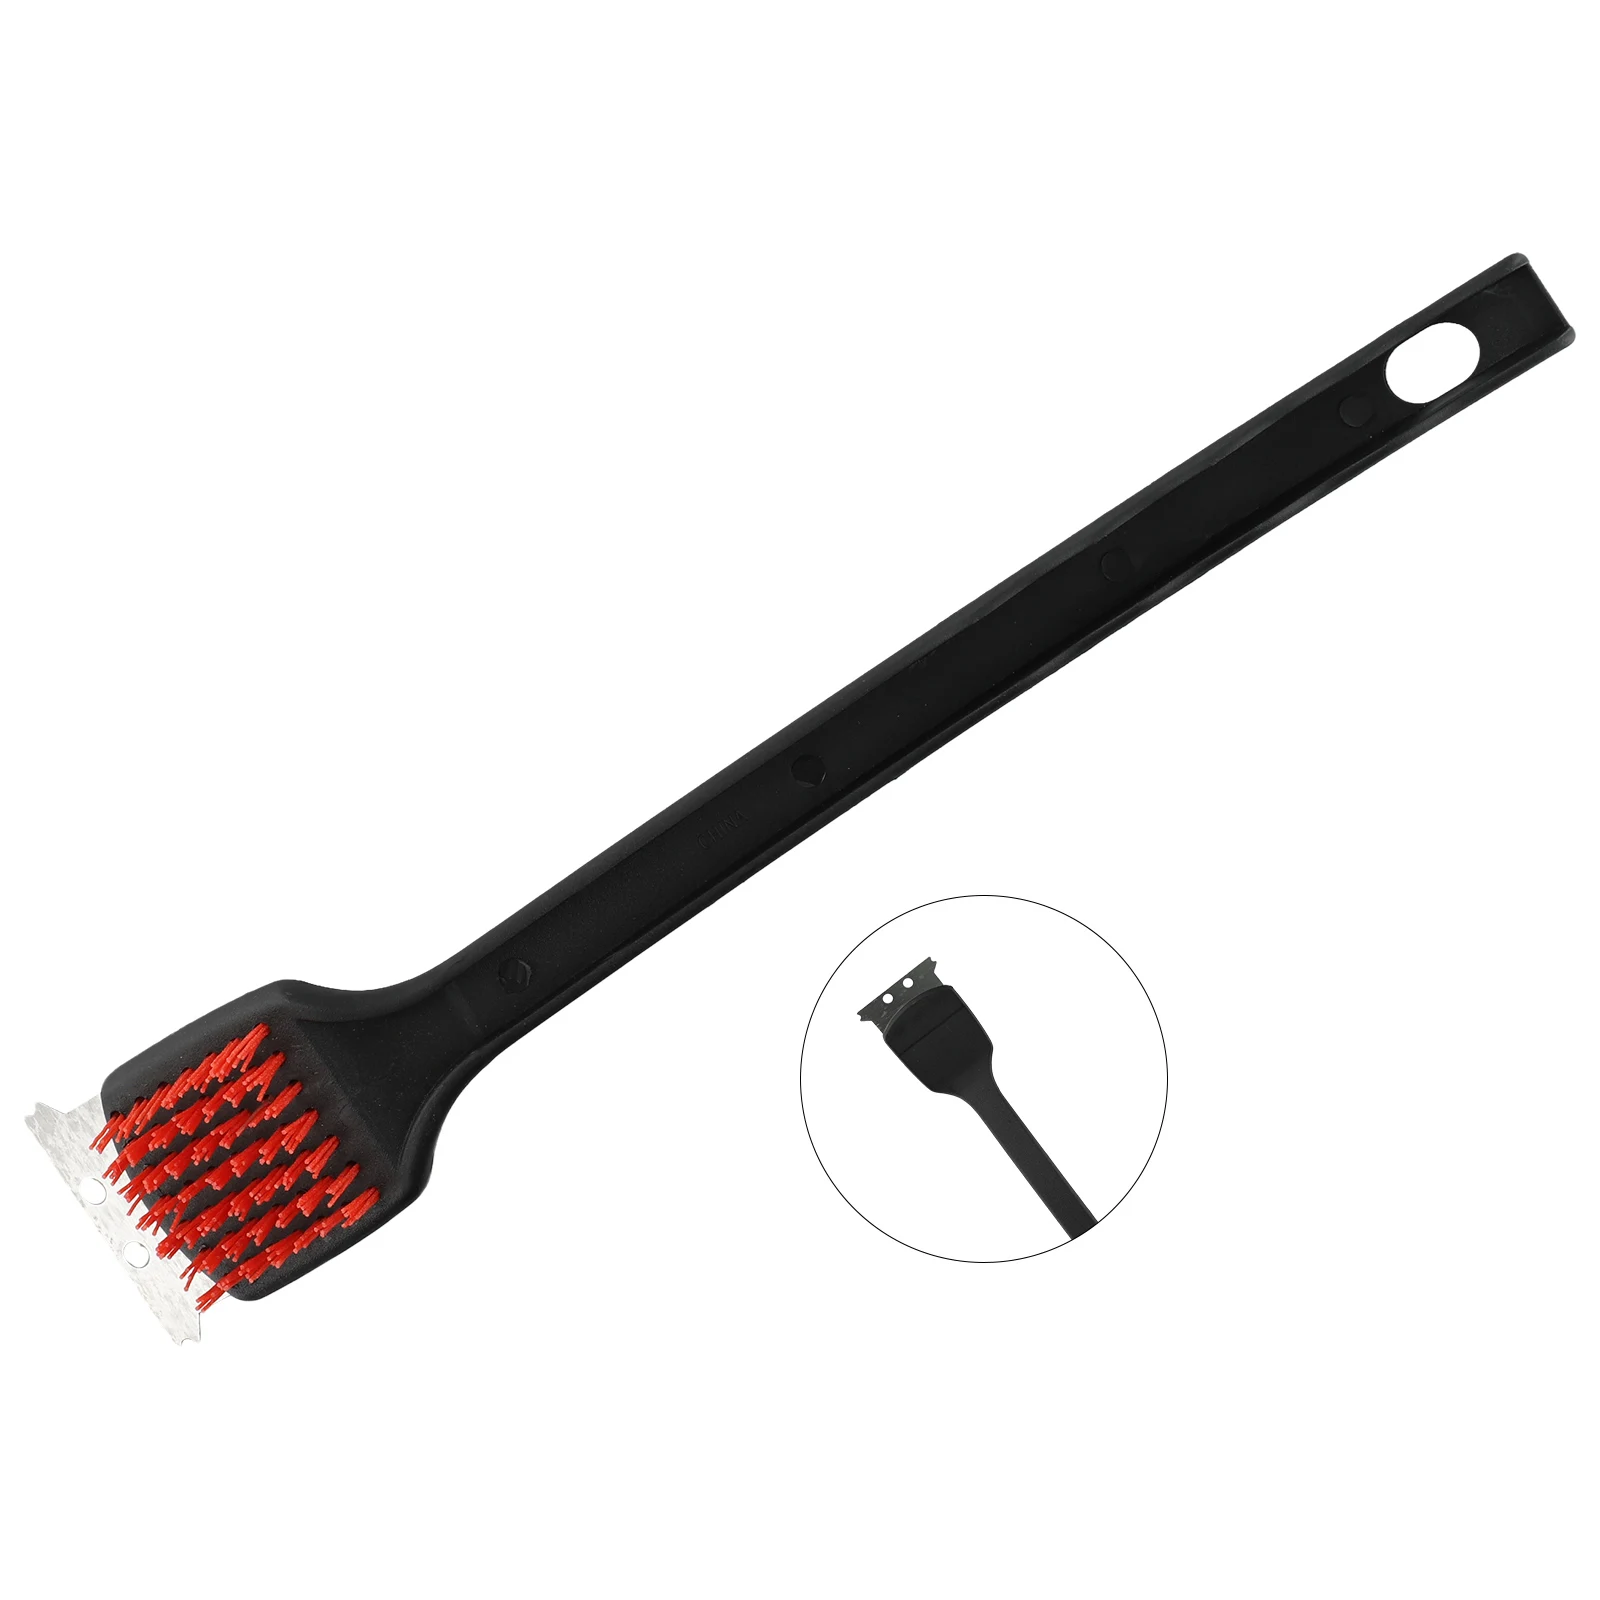 

New Oil Cleaning Brush Long Handle Safe Nylon Bristle BBQ Grill Cleaning Brush Steel Scraper Head Kitchen Supplies And Tools